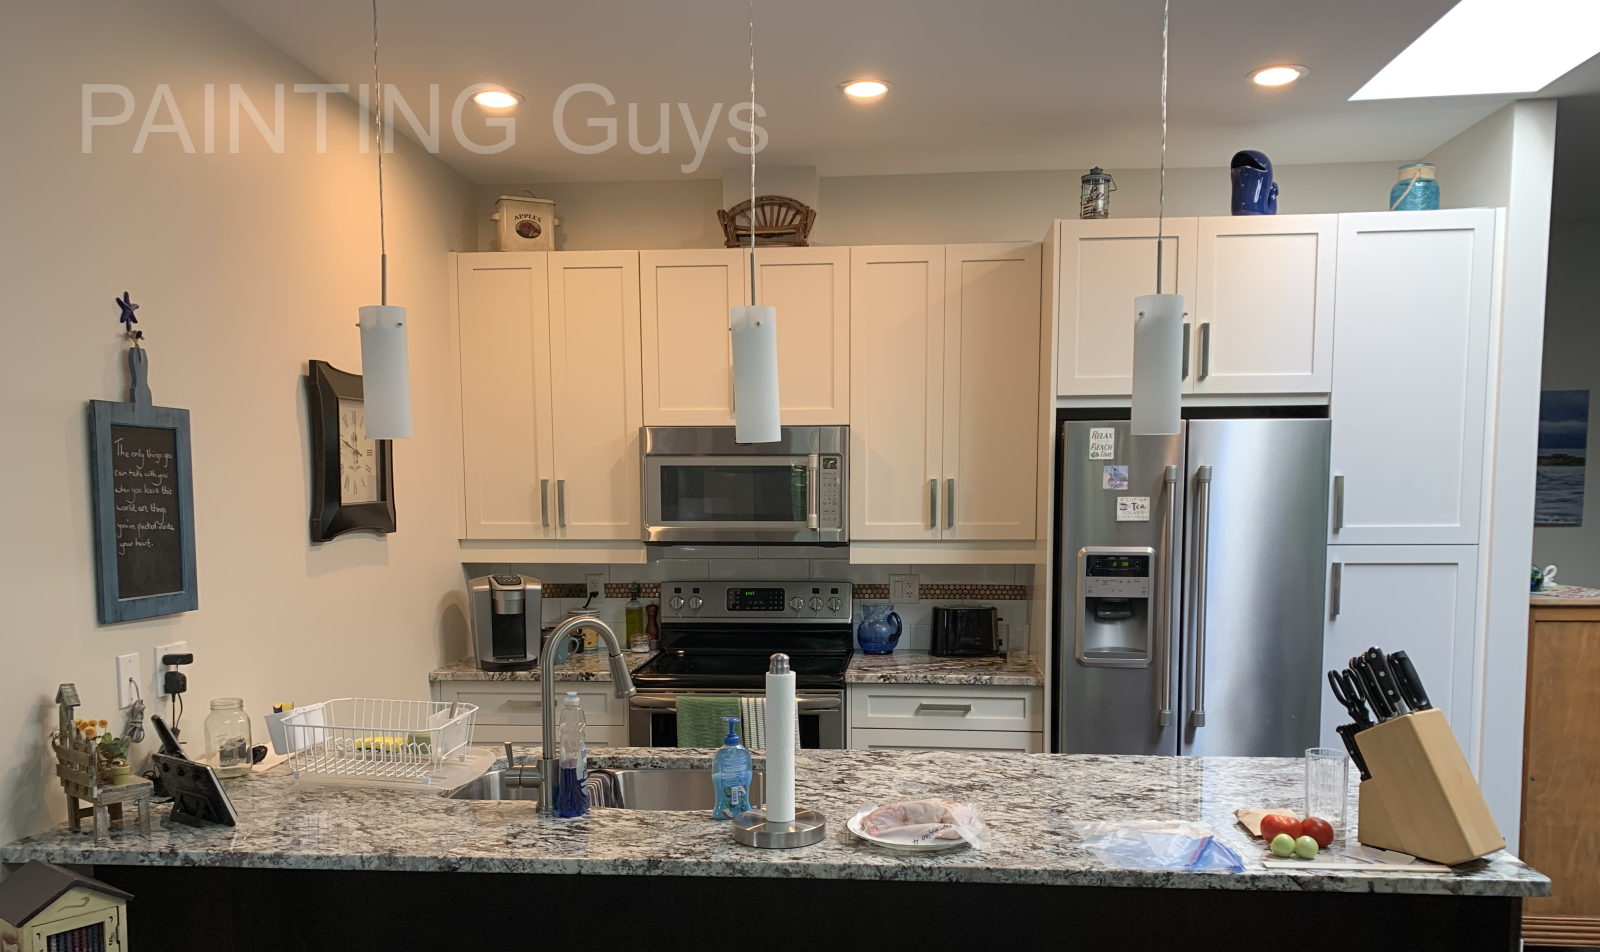 Kitchen Cabinet Painting, Parksville, BC: PAINTING Guys